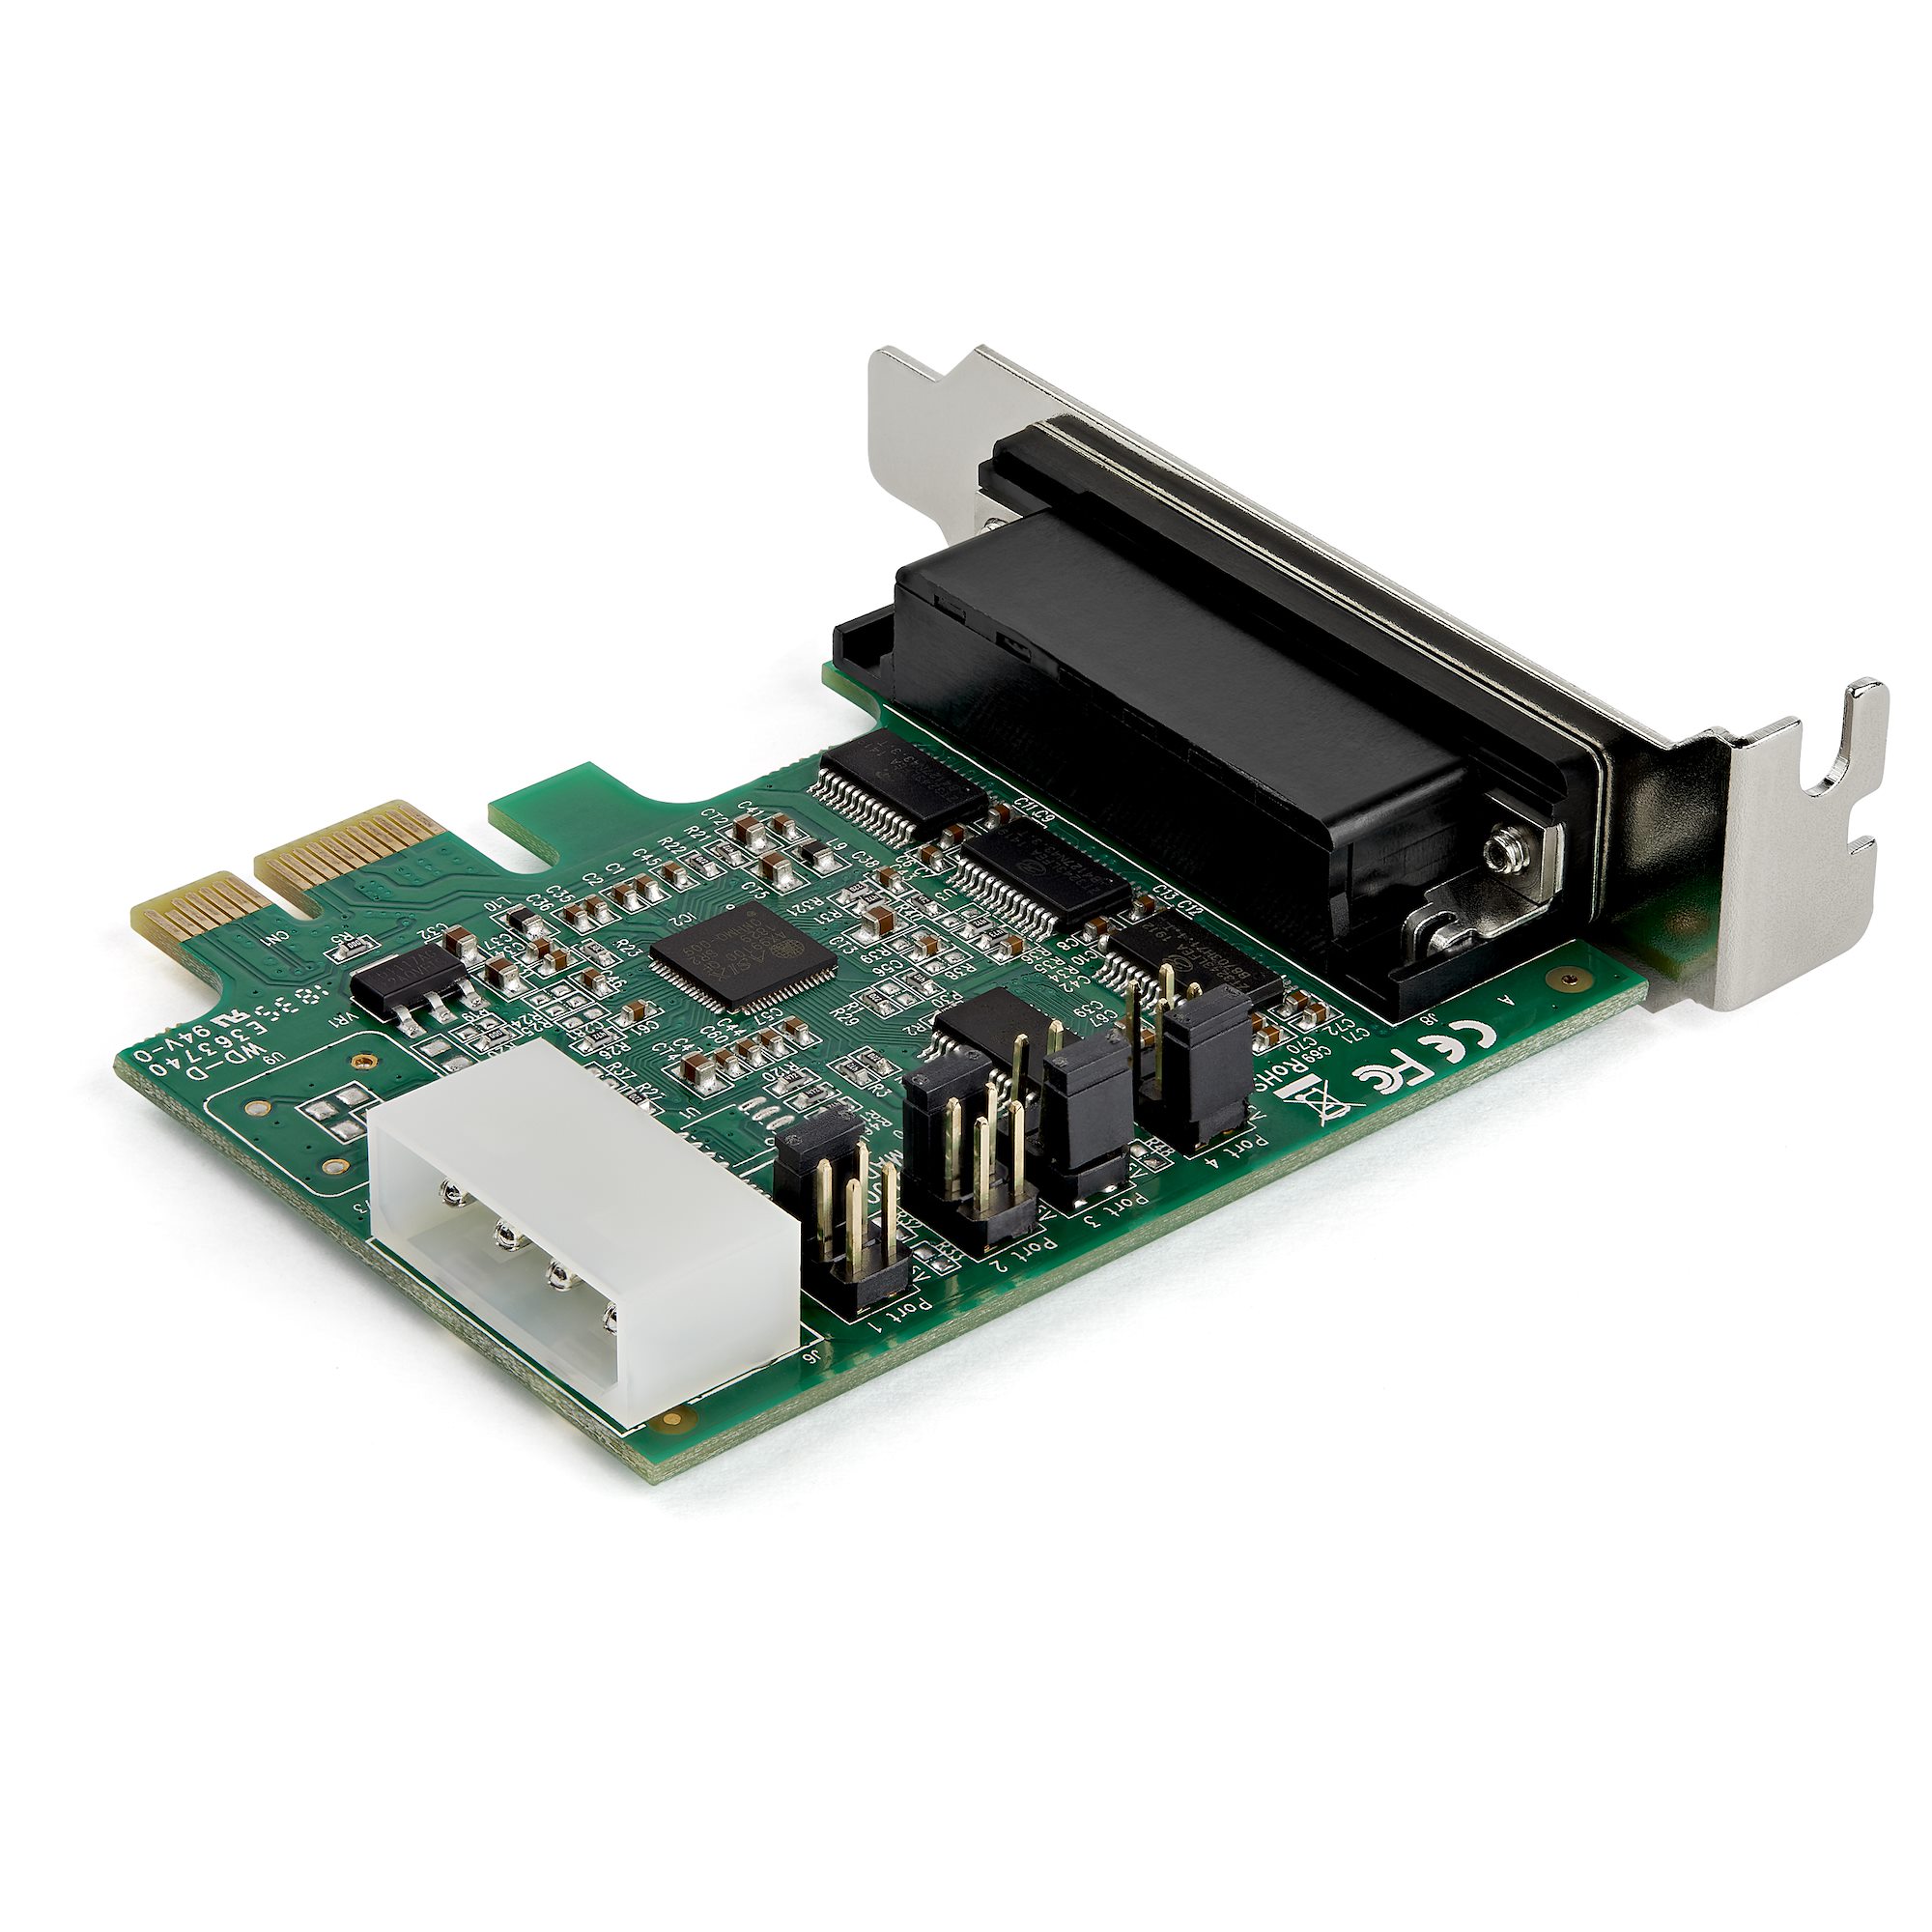 4Port PCIe RS232 Serial DB9 Adapter Card - Serial Cards & Adapters